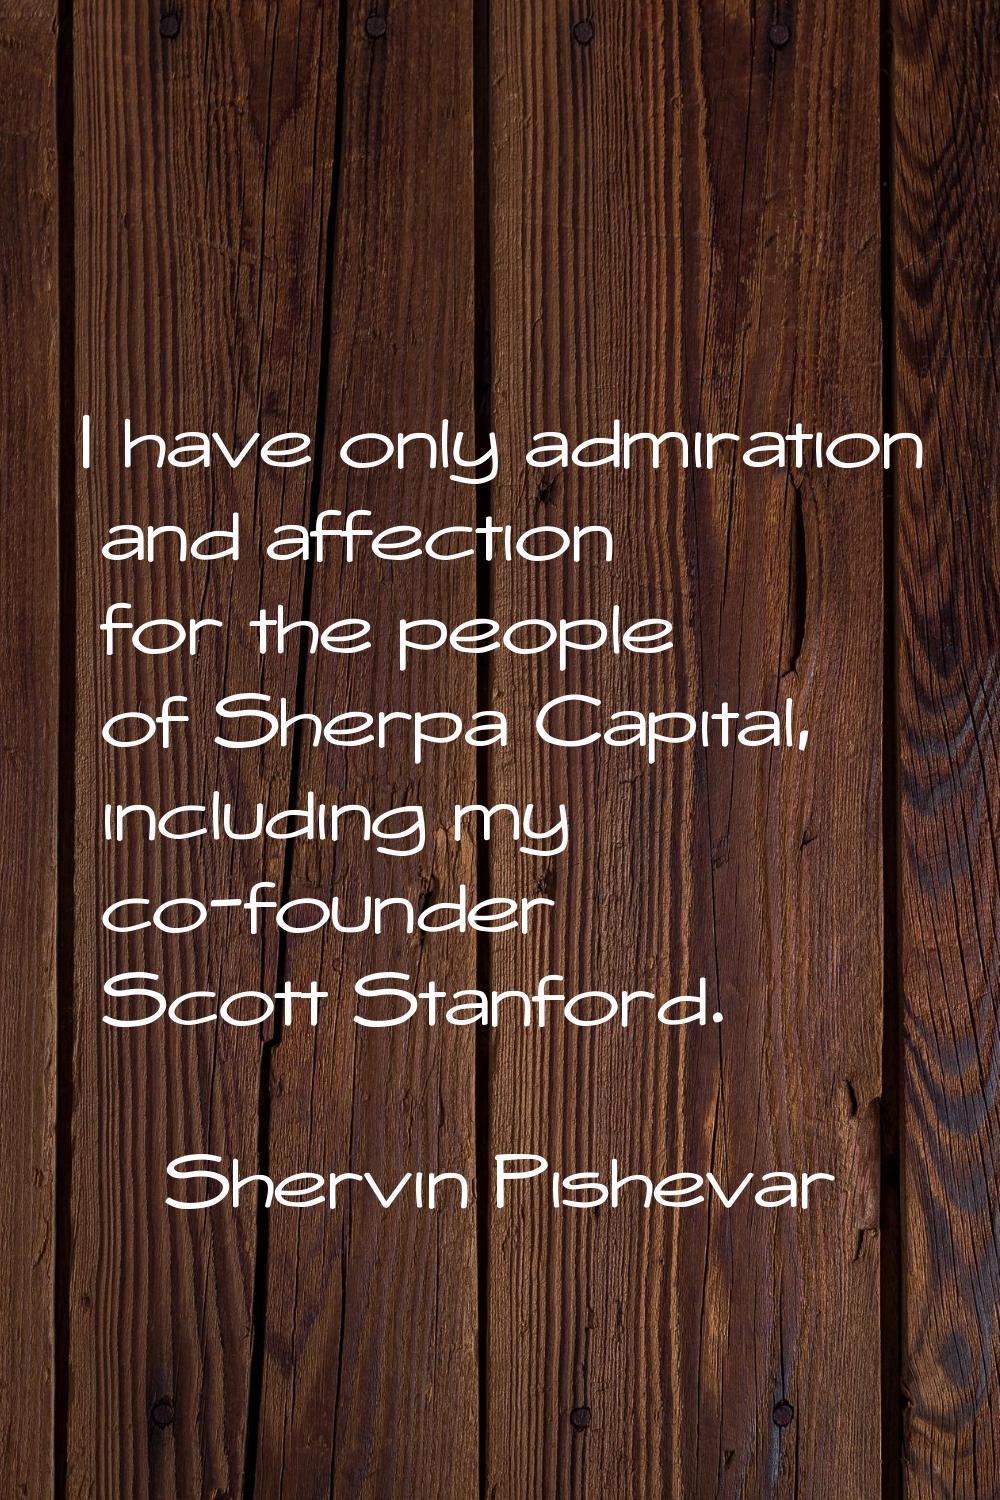 I have only admiration and affection for the people of Sherpa Capital, including my co-founder Scot